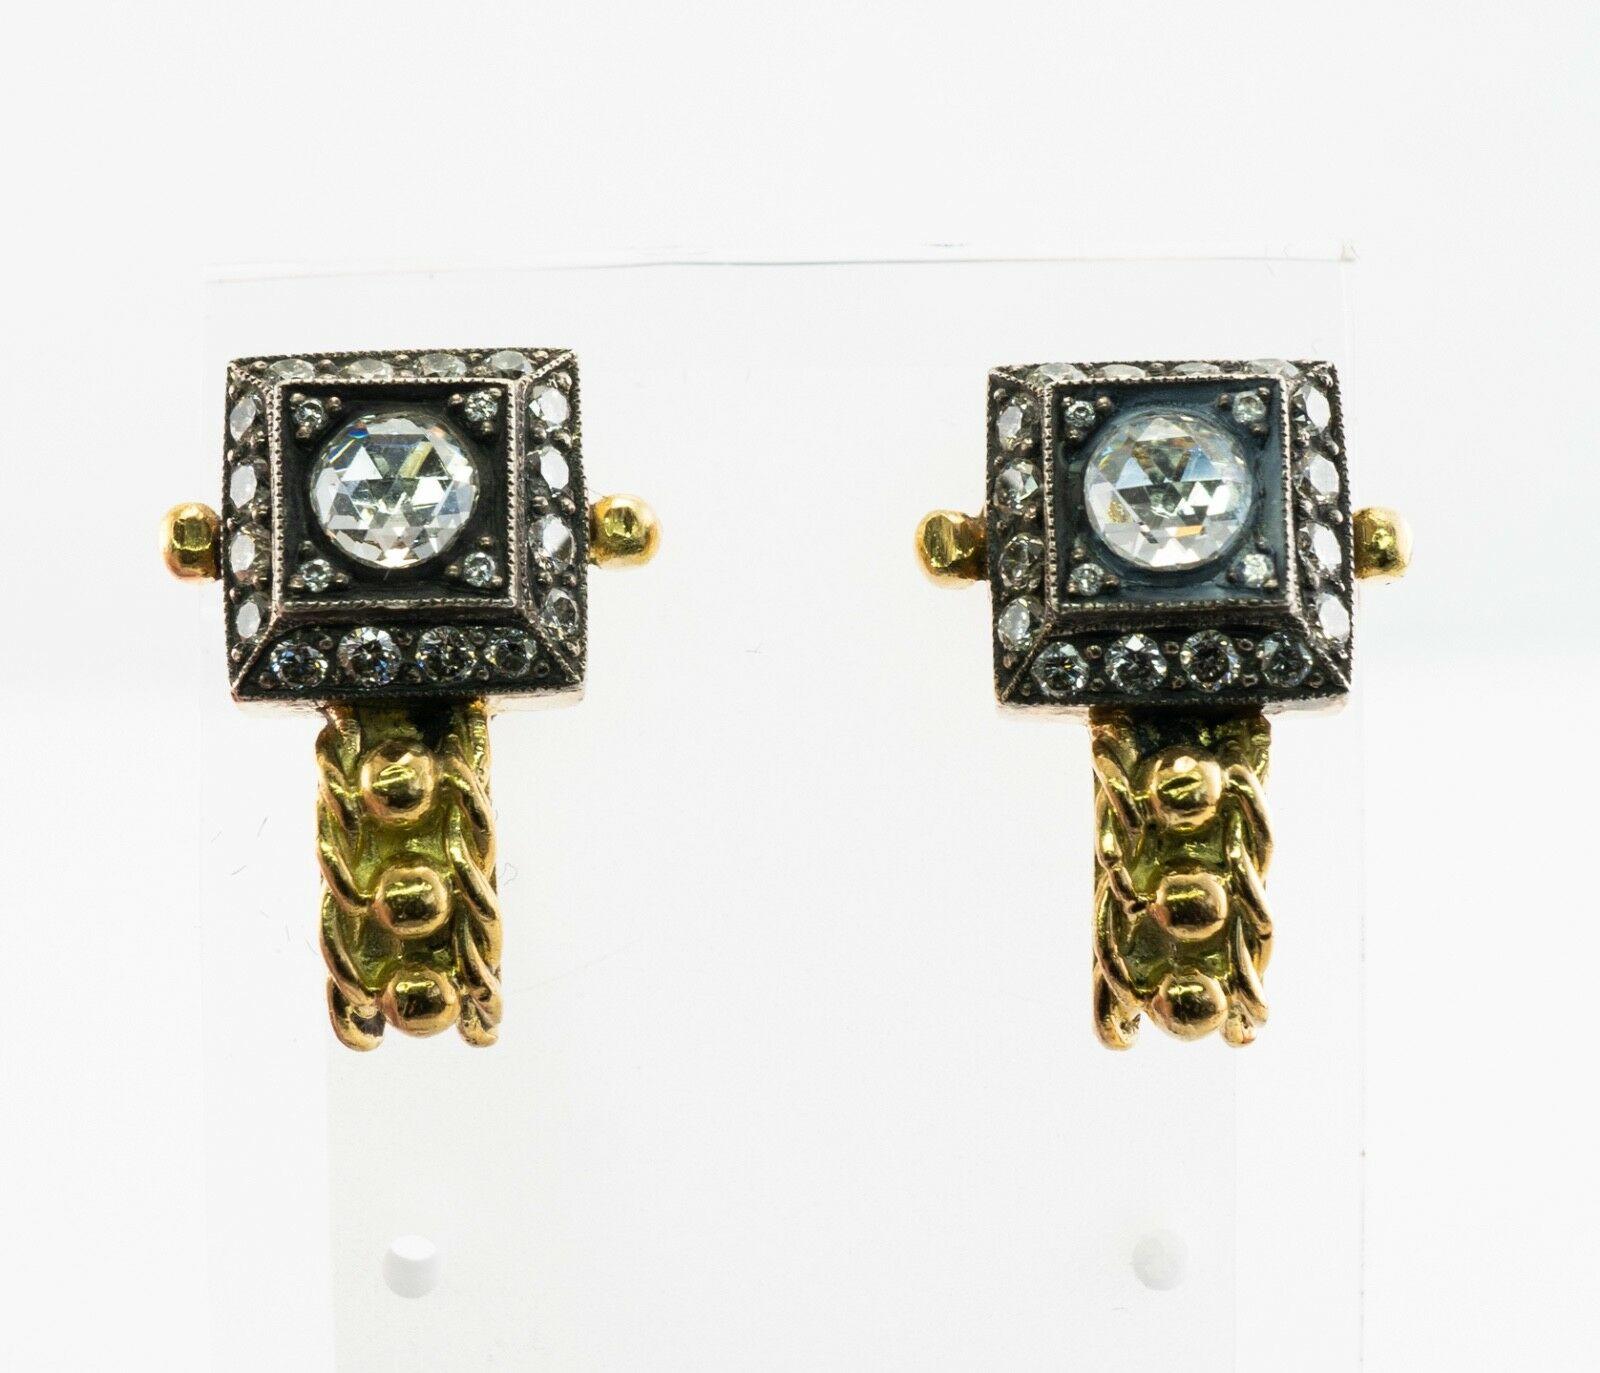 Diamonds Earrings 18K Gold & Sterling Silver Vintage

Diamond earrings, sterling silver earrings, 18K Gold earrings. These gorgeous earrings have been purchased from jewelry auction and they still have a tag for $3450. The earrings are crafted in